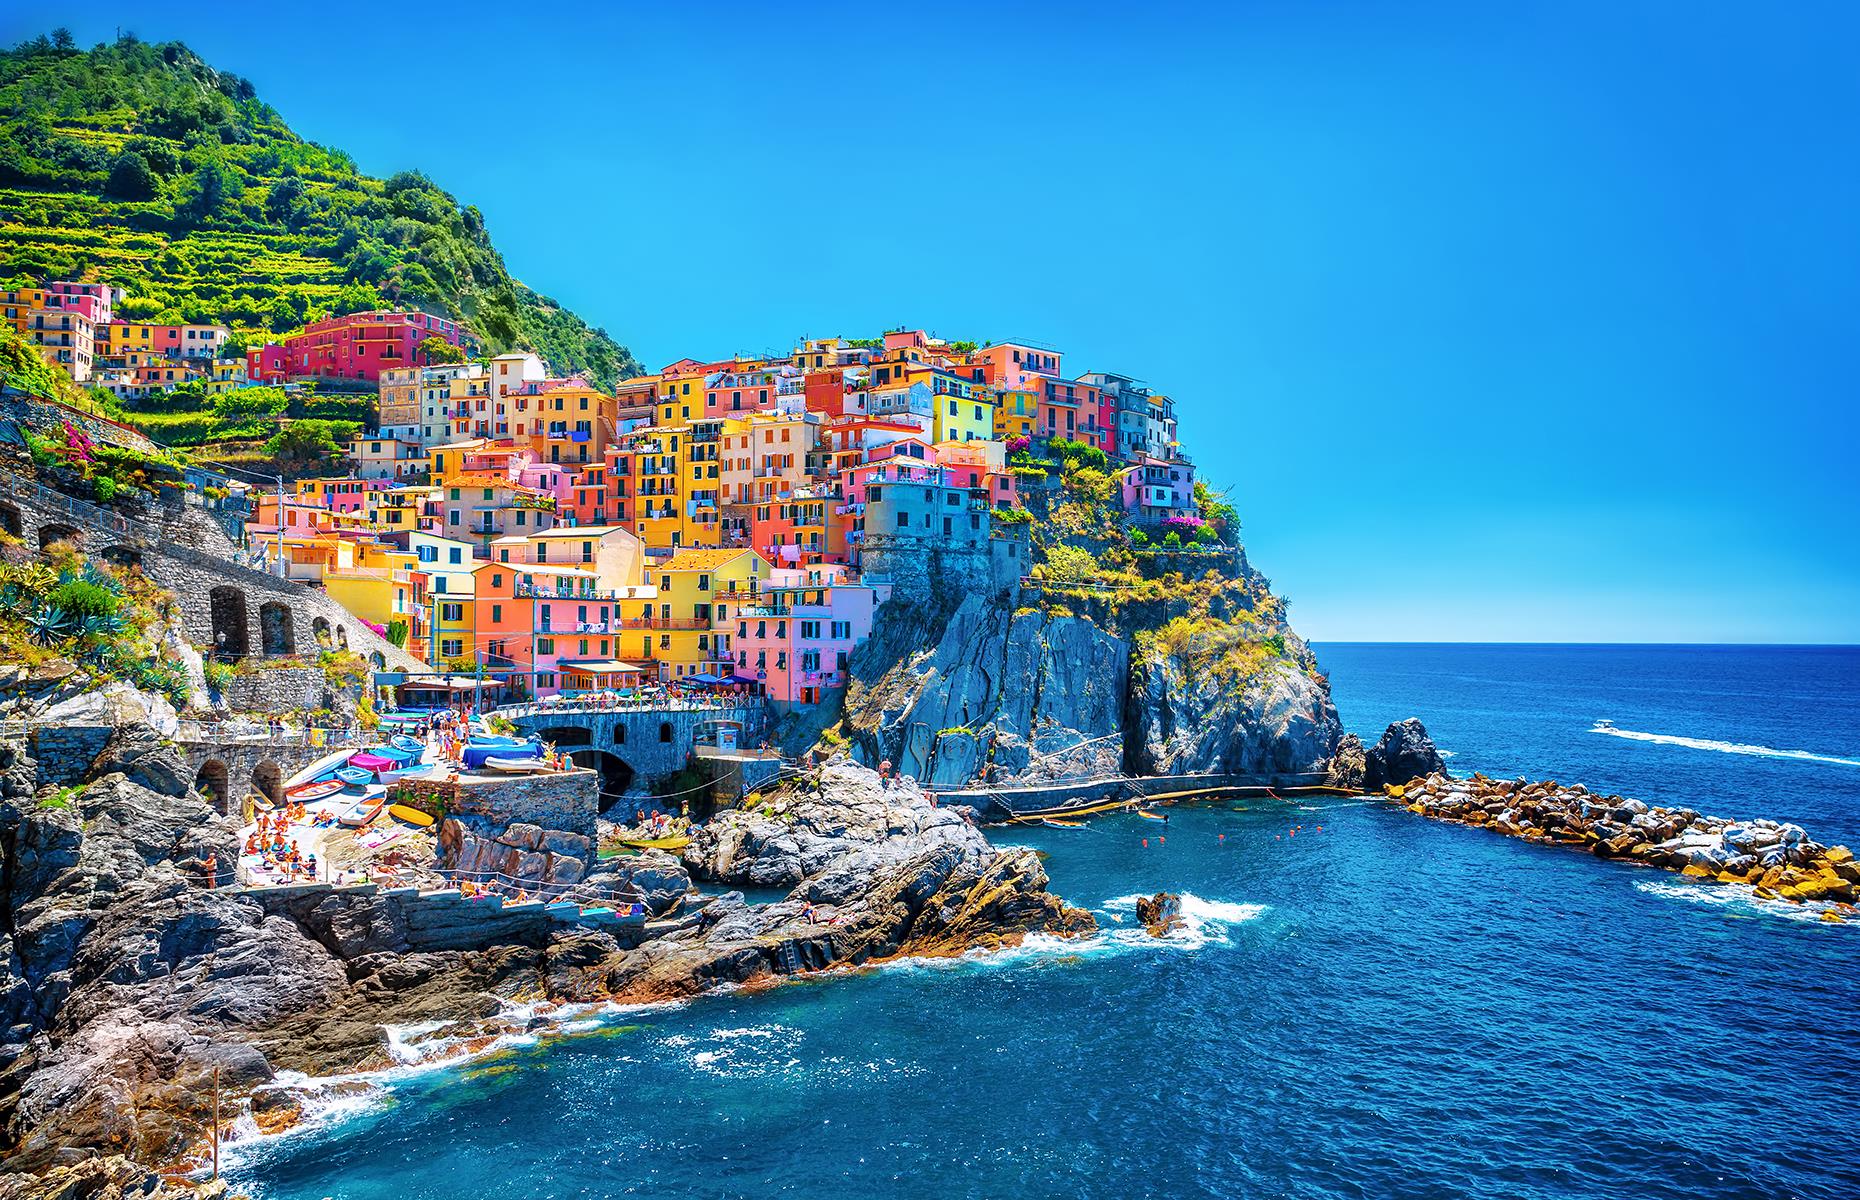 <p>Set on the rocky coastal cliffs of northwestern Italy, Manarola is one of the five fishing villages that make up Cinque Terre – one of the world's most colorful destinations. The homes are said to have been painted in bright shades of blue, pink, yellow and orange so that the returning fishermen could spot their homes easier. </p>  <p><a href="https://www.loveexploring.com/galleries/108696/italys-most-beautiful-towns-and-villages?page=1"><strong>Here are Italy's most beautiful small towns and villages</strong></a></p>